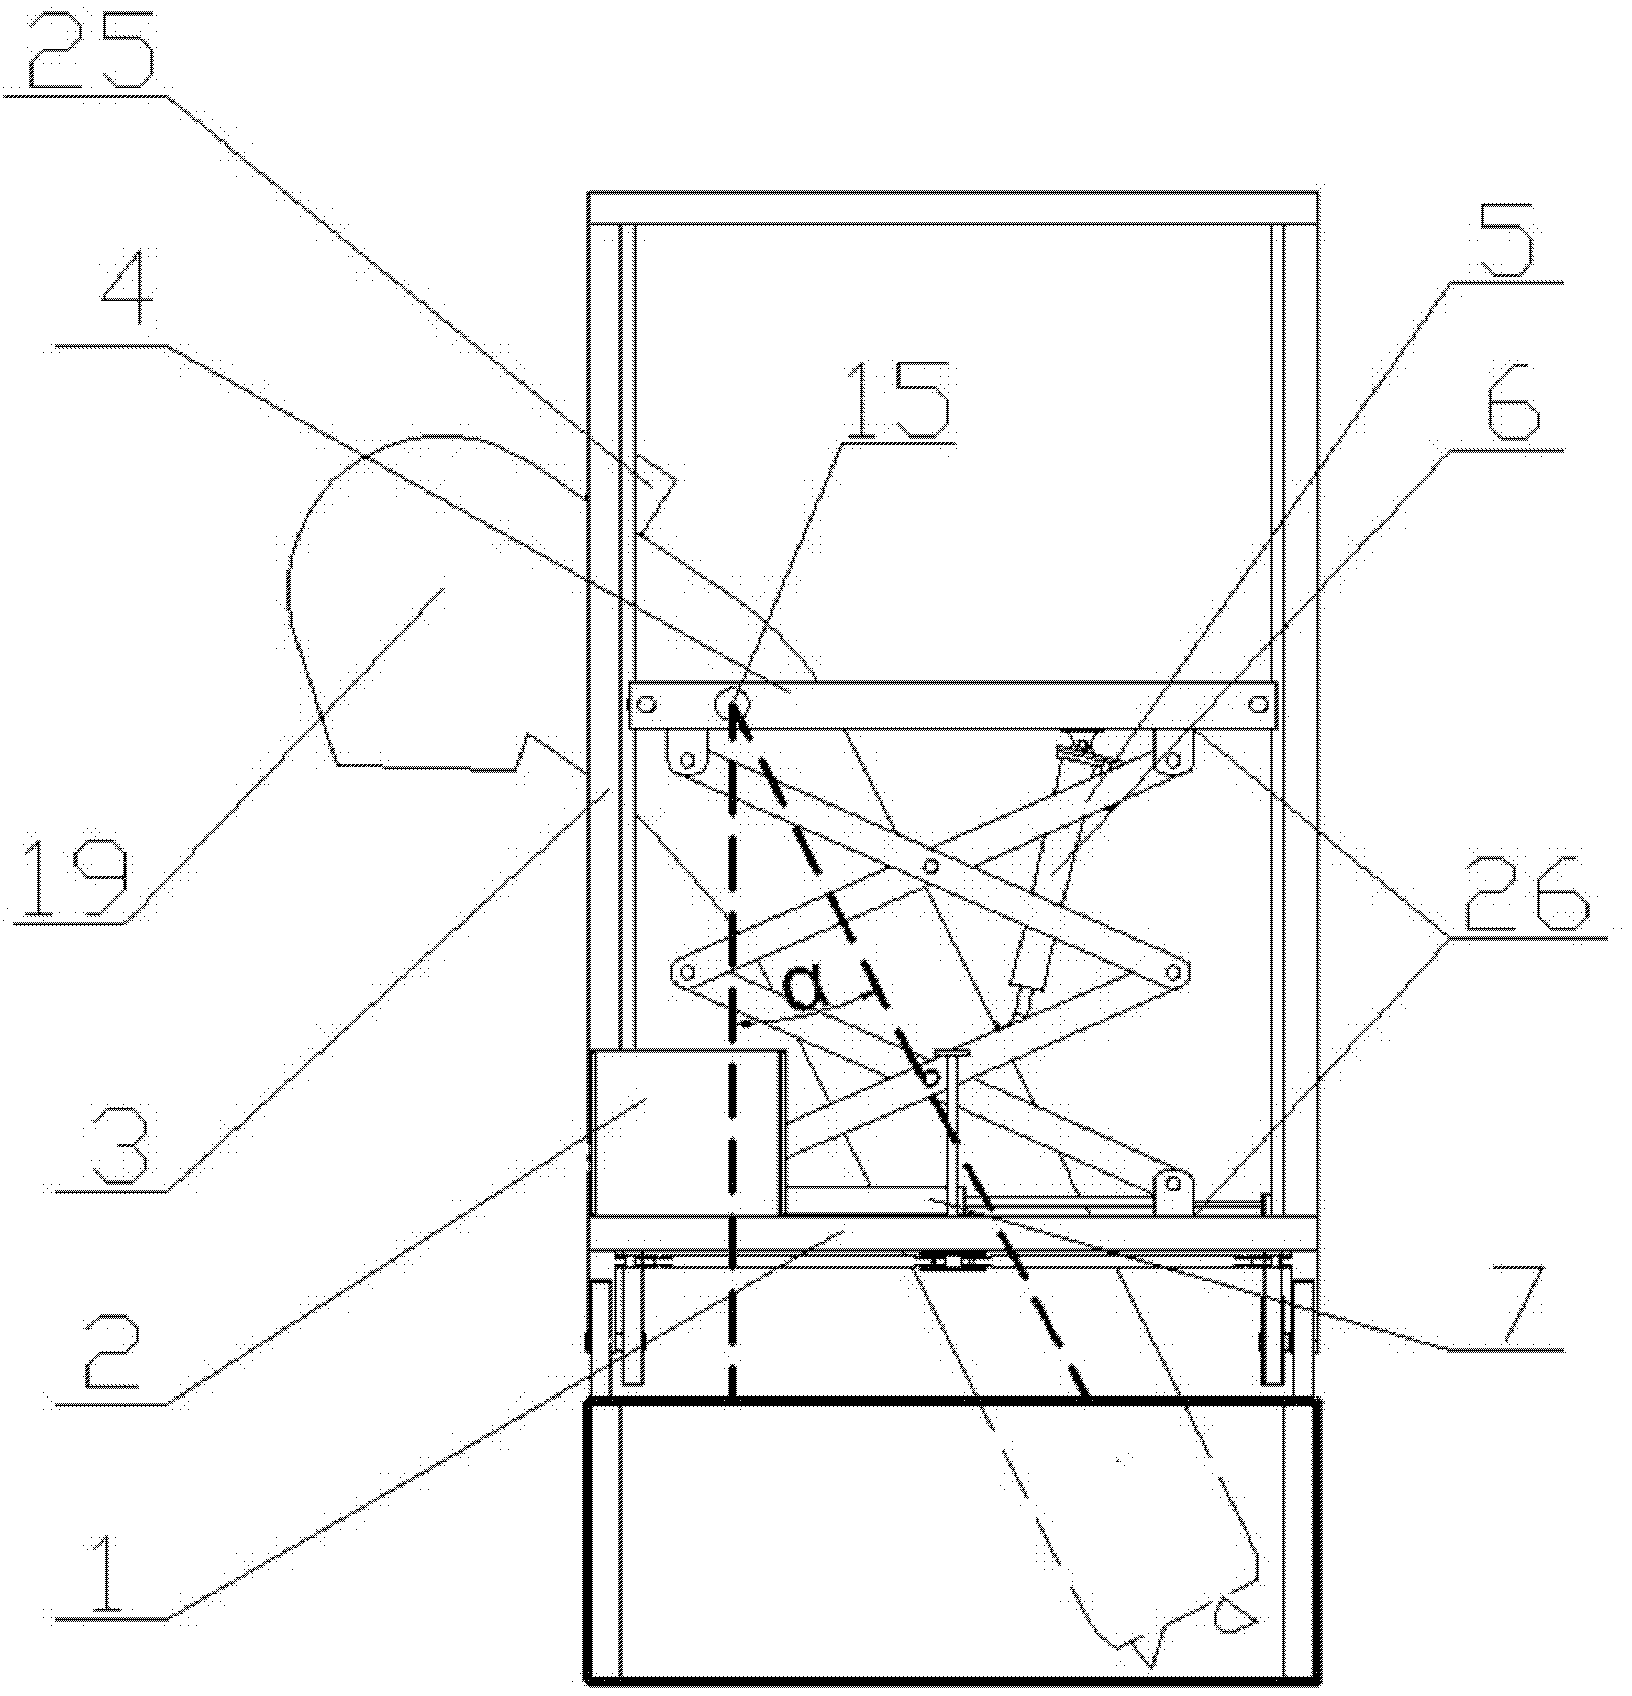 Automatic fermented grain material discharge device